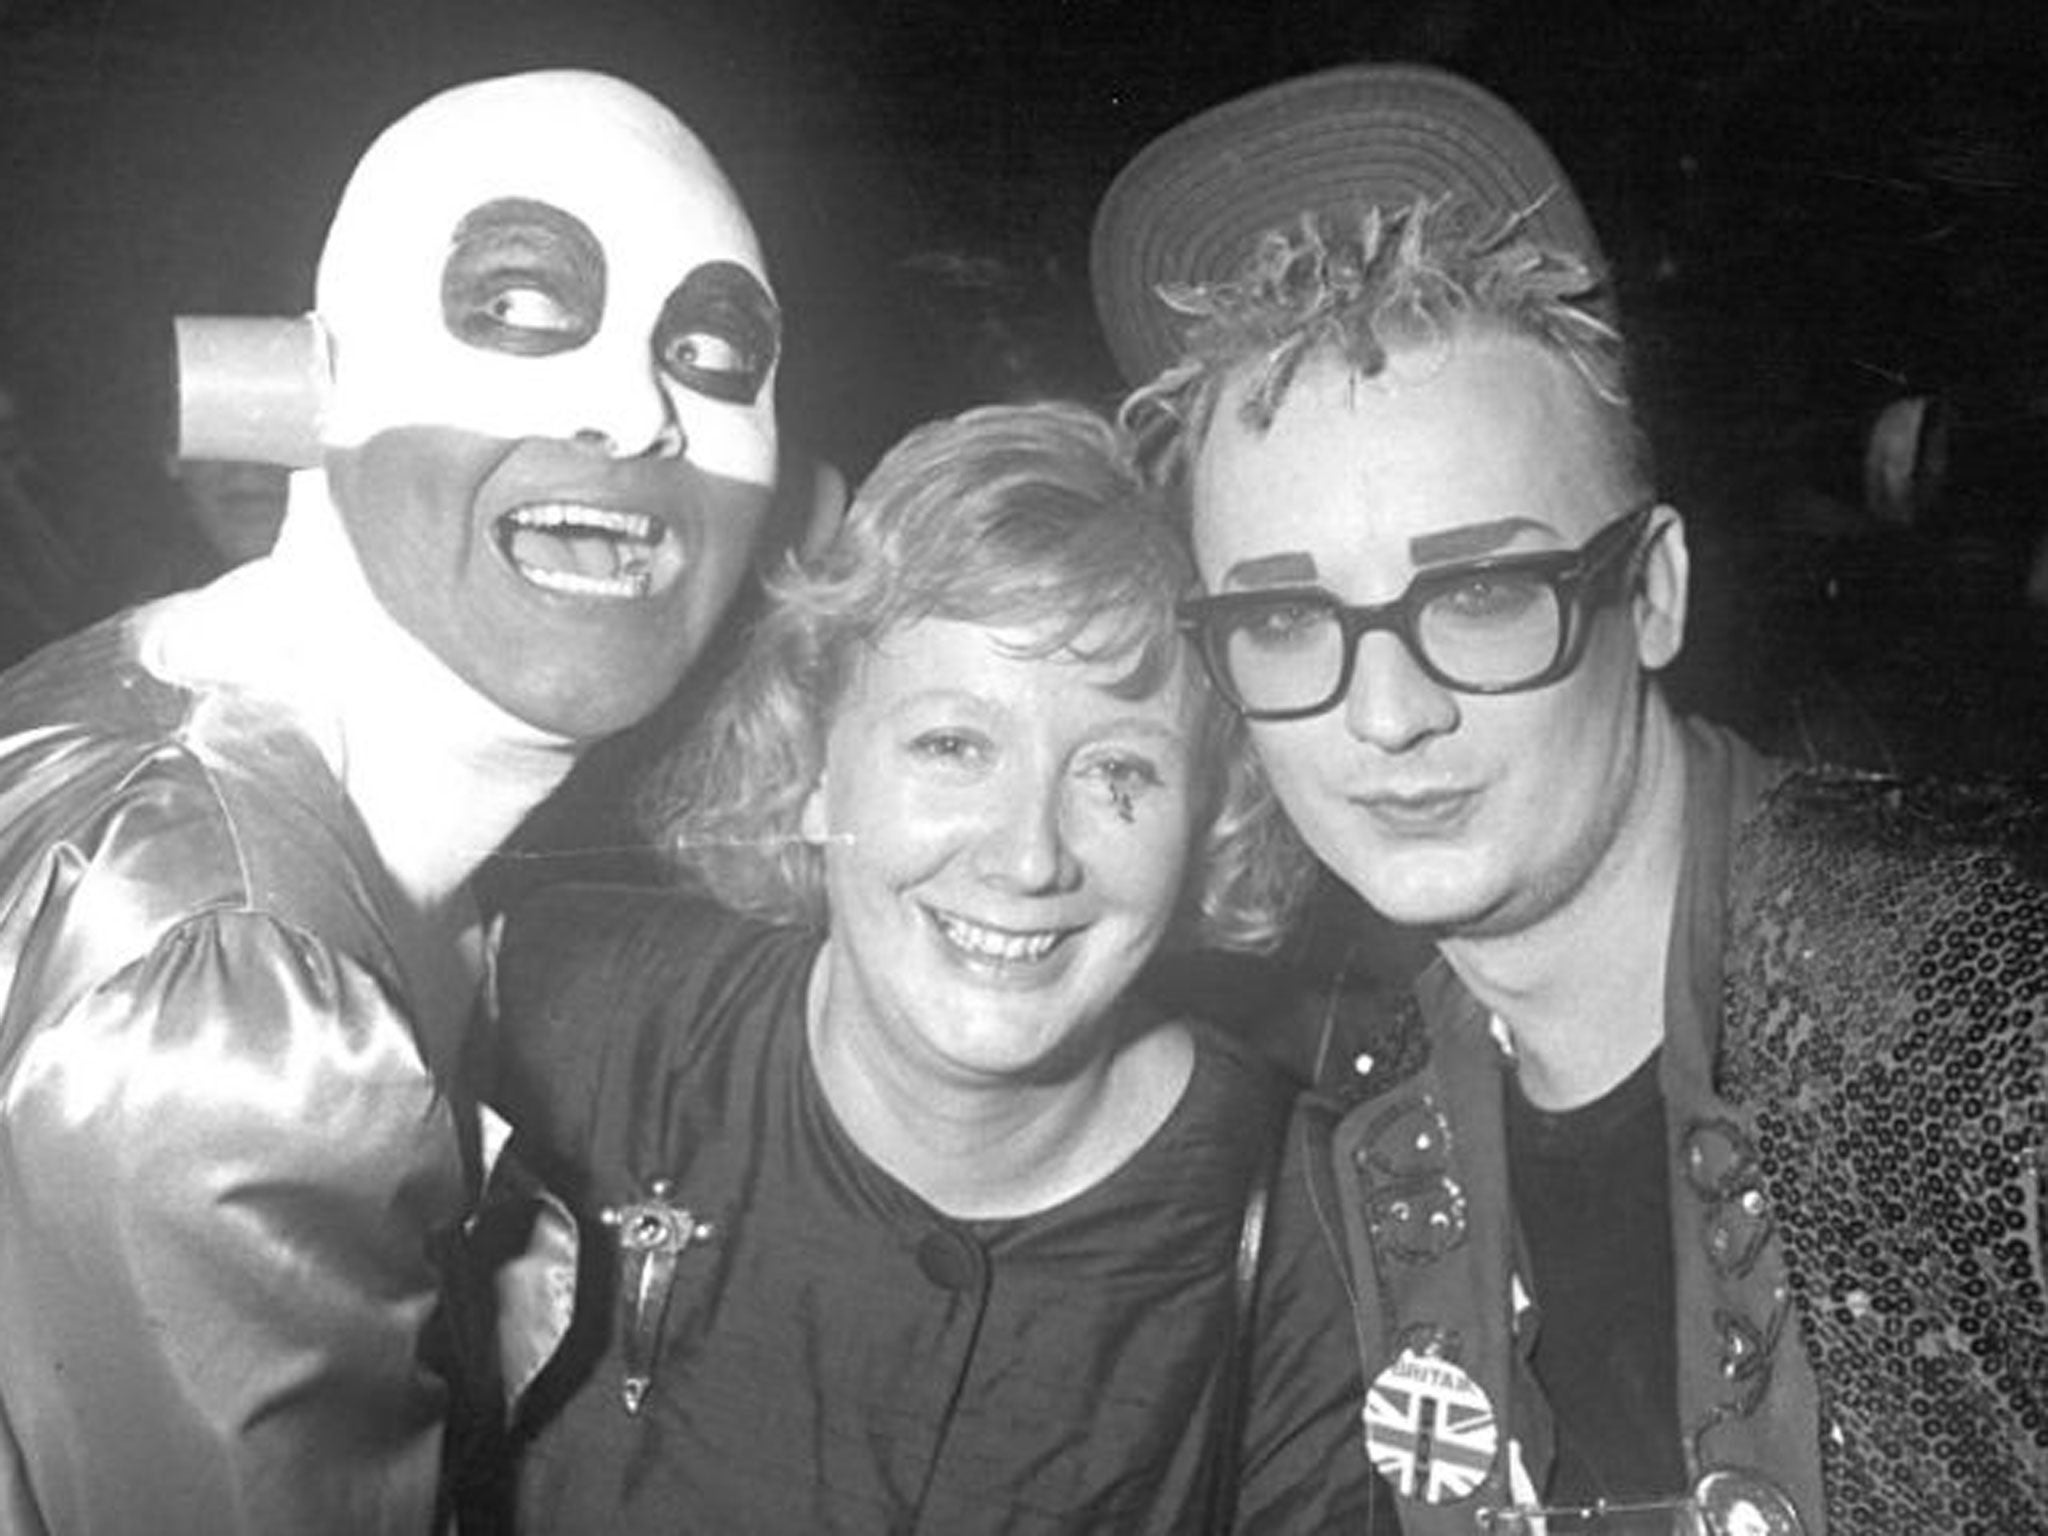 Central player in the music-promo revolution: Watts, centre, with Boy George, right